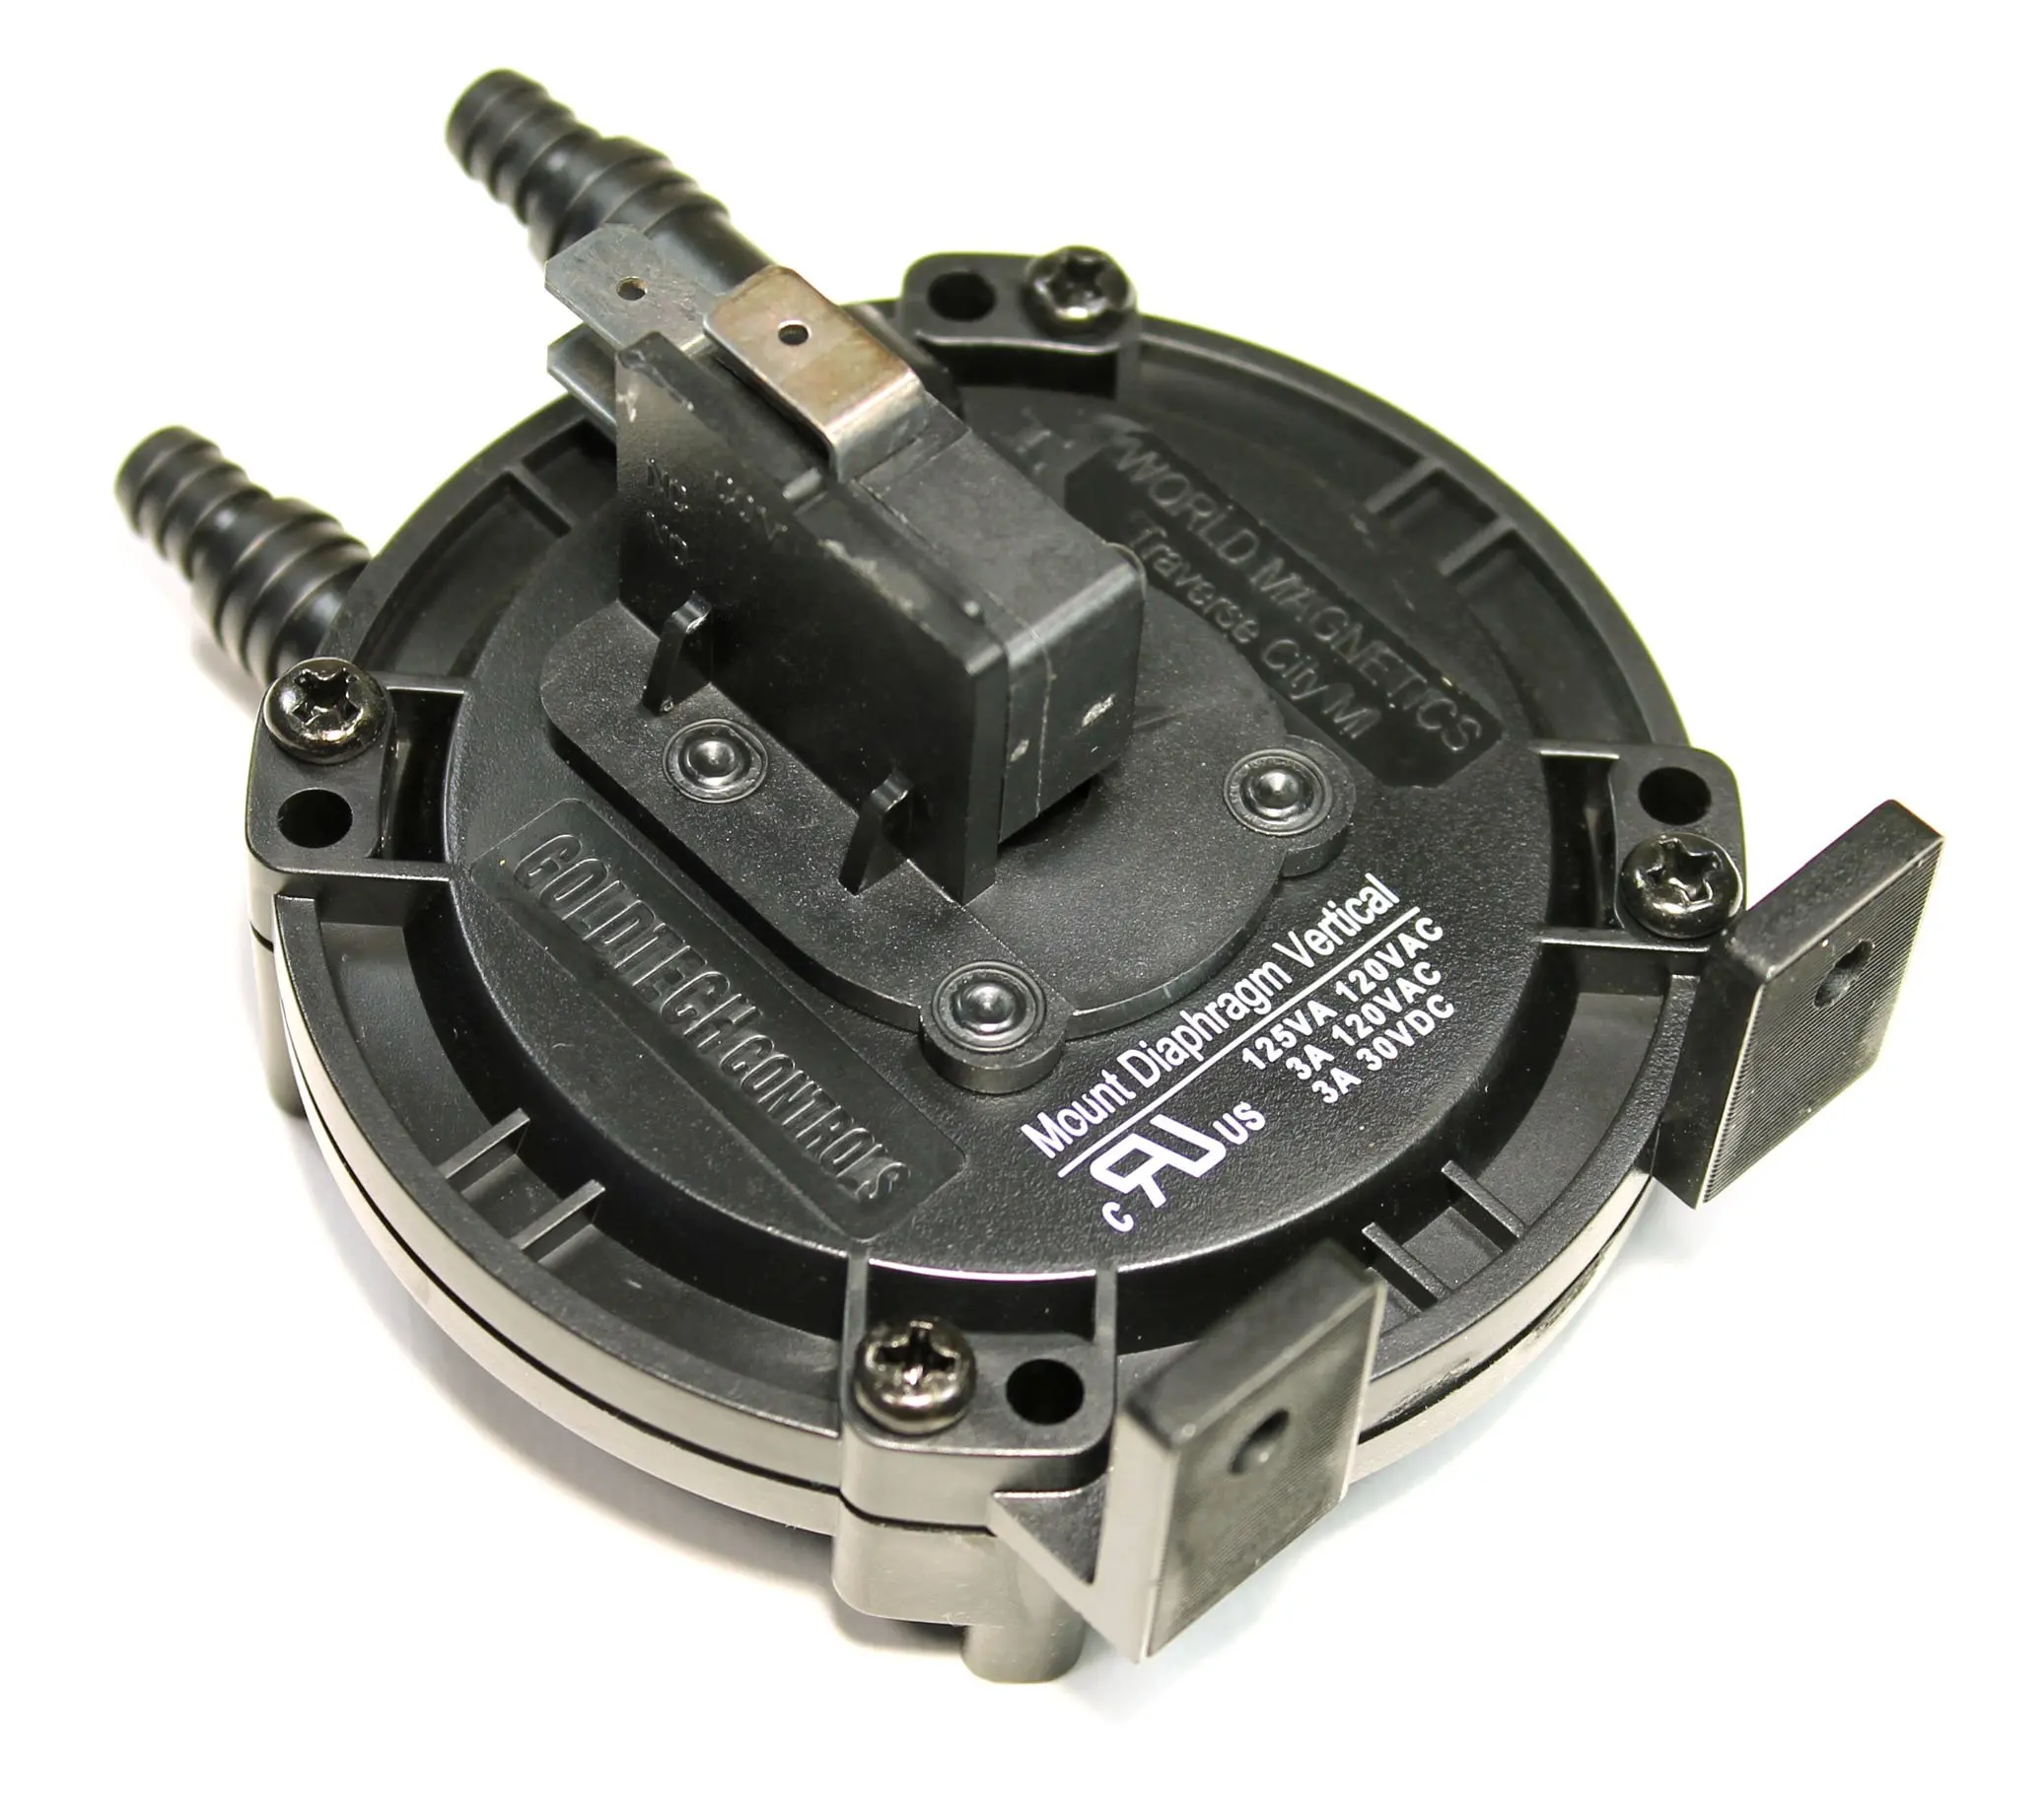 Set Point Range 0.08 to 1.20WC Dwyer Series ADPS HVAC Adjustable Differential Pressure Switch M20 Connection